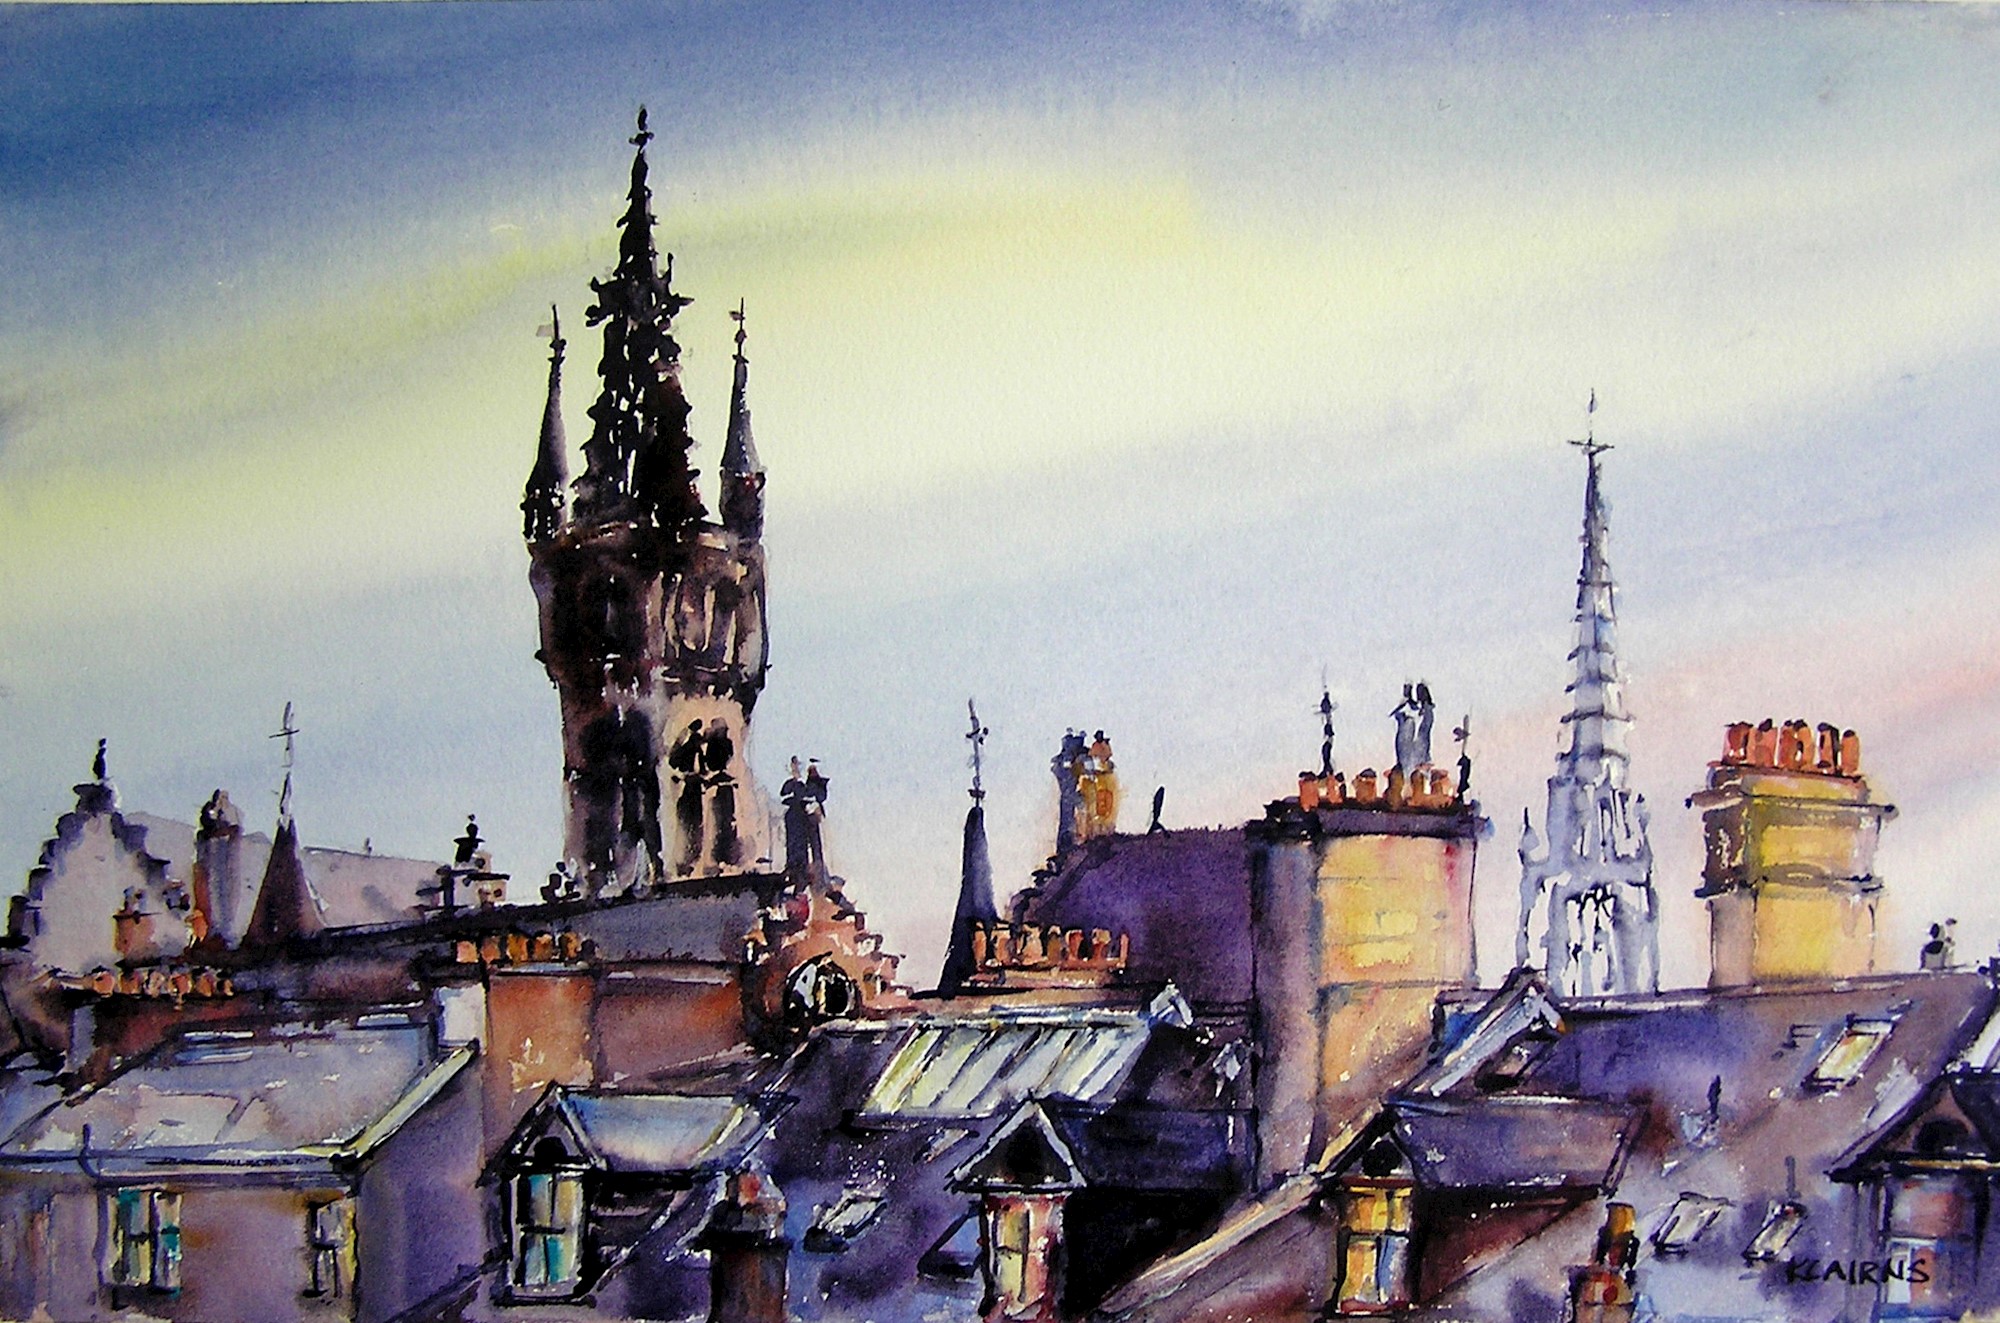 'Turrets and Towers, Glasgow University' by artist Karen Cairns